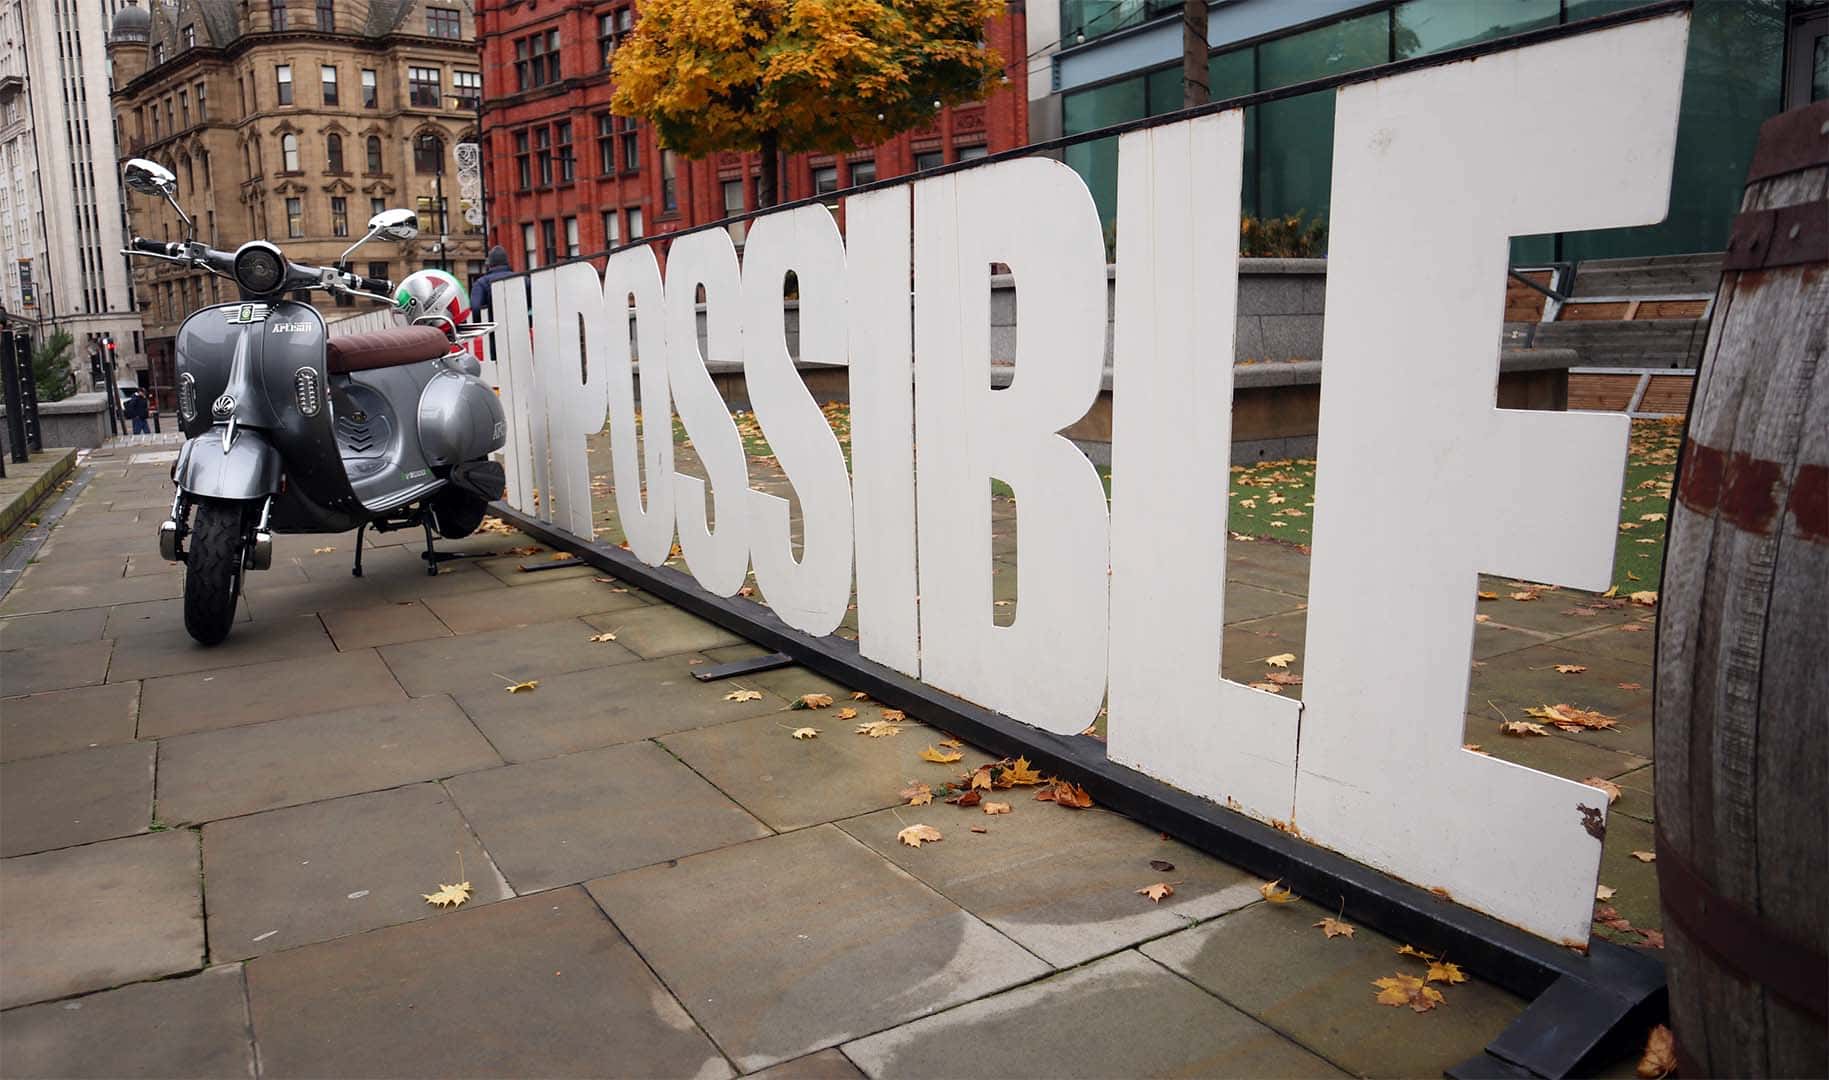 Artisan moped by sign saying impossible